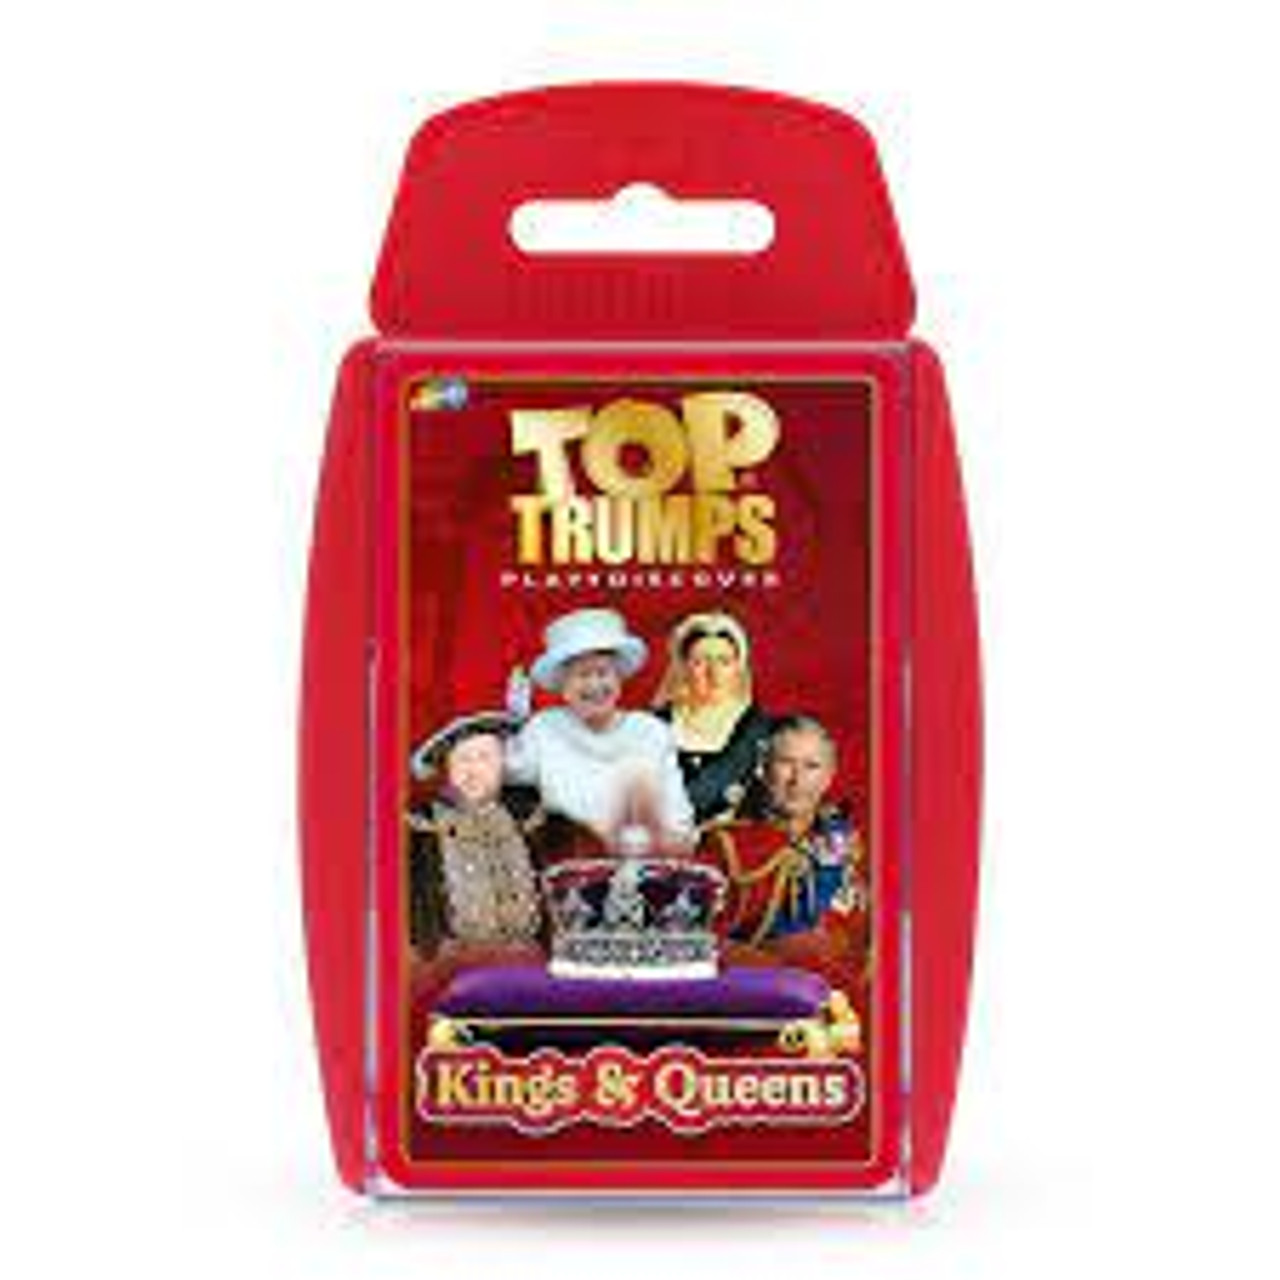 TOP TRUMPS - KINGS AND QUEENS